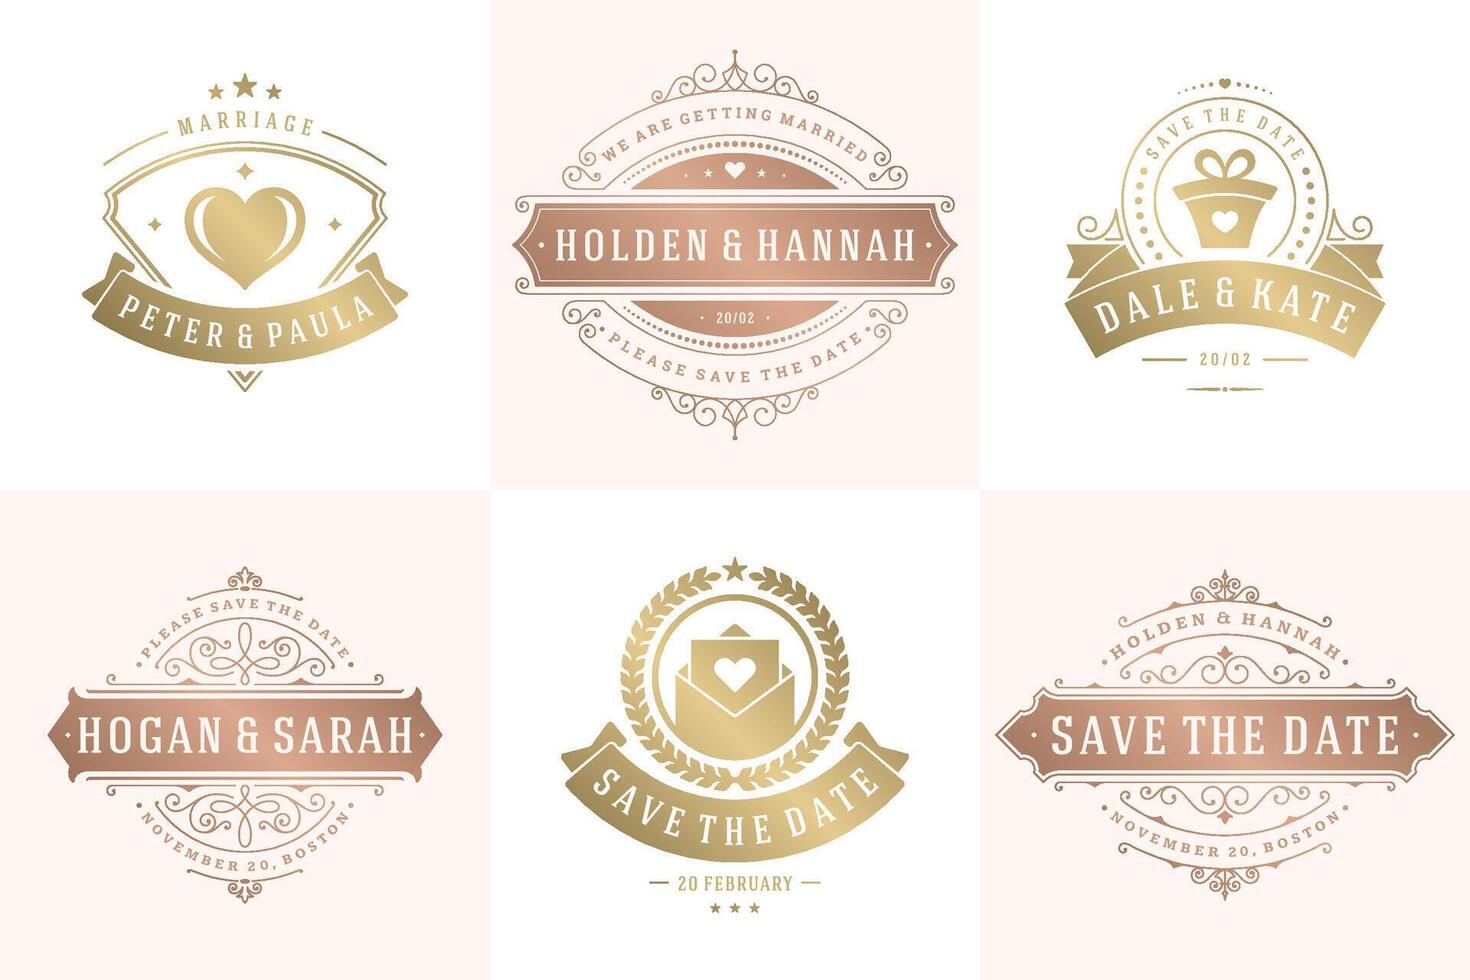 Wedding invitations save the date logos and badges elegant templates set vector